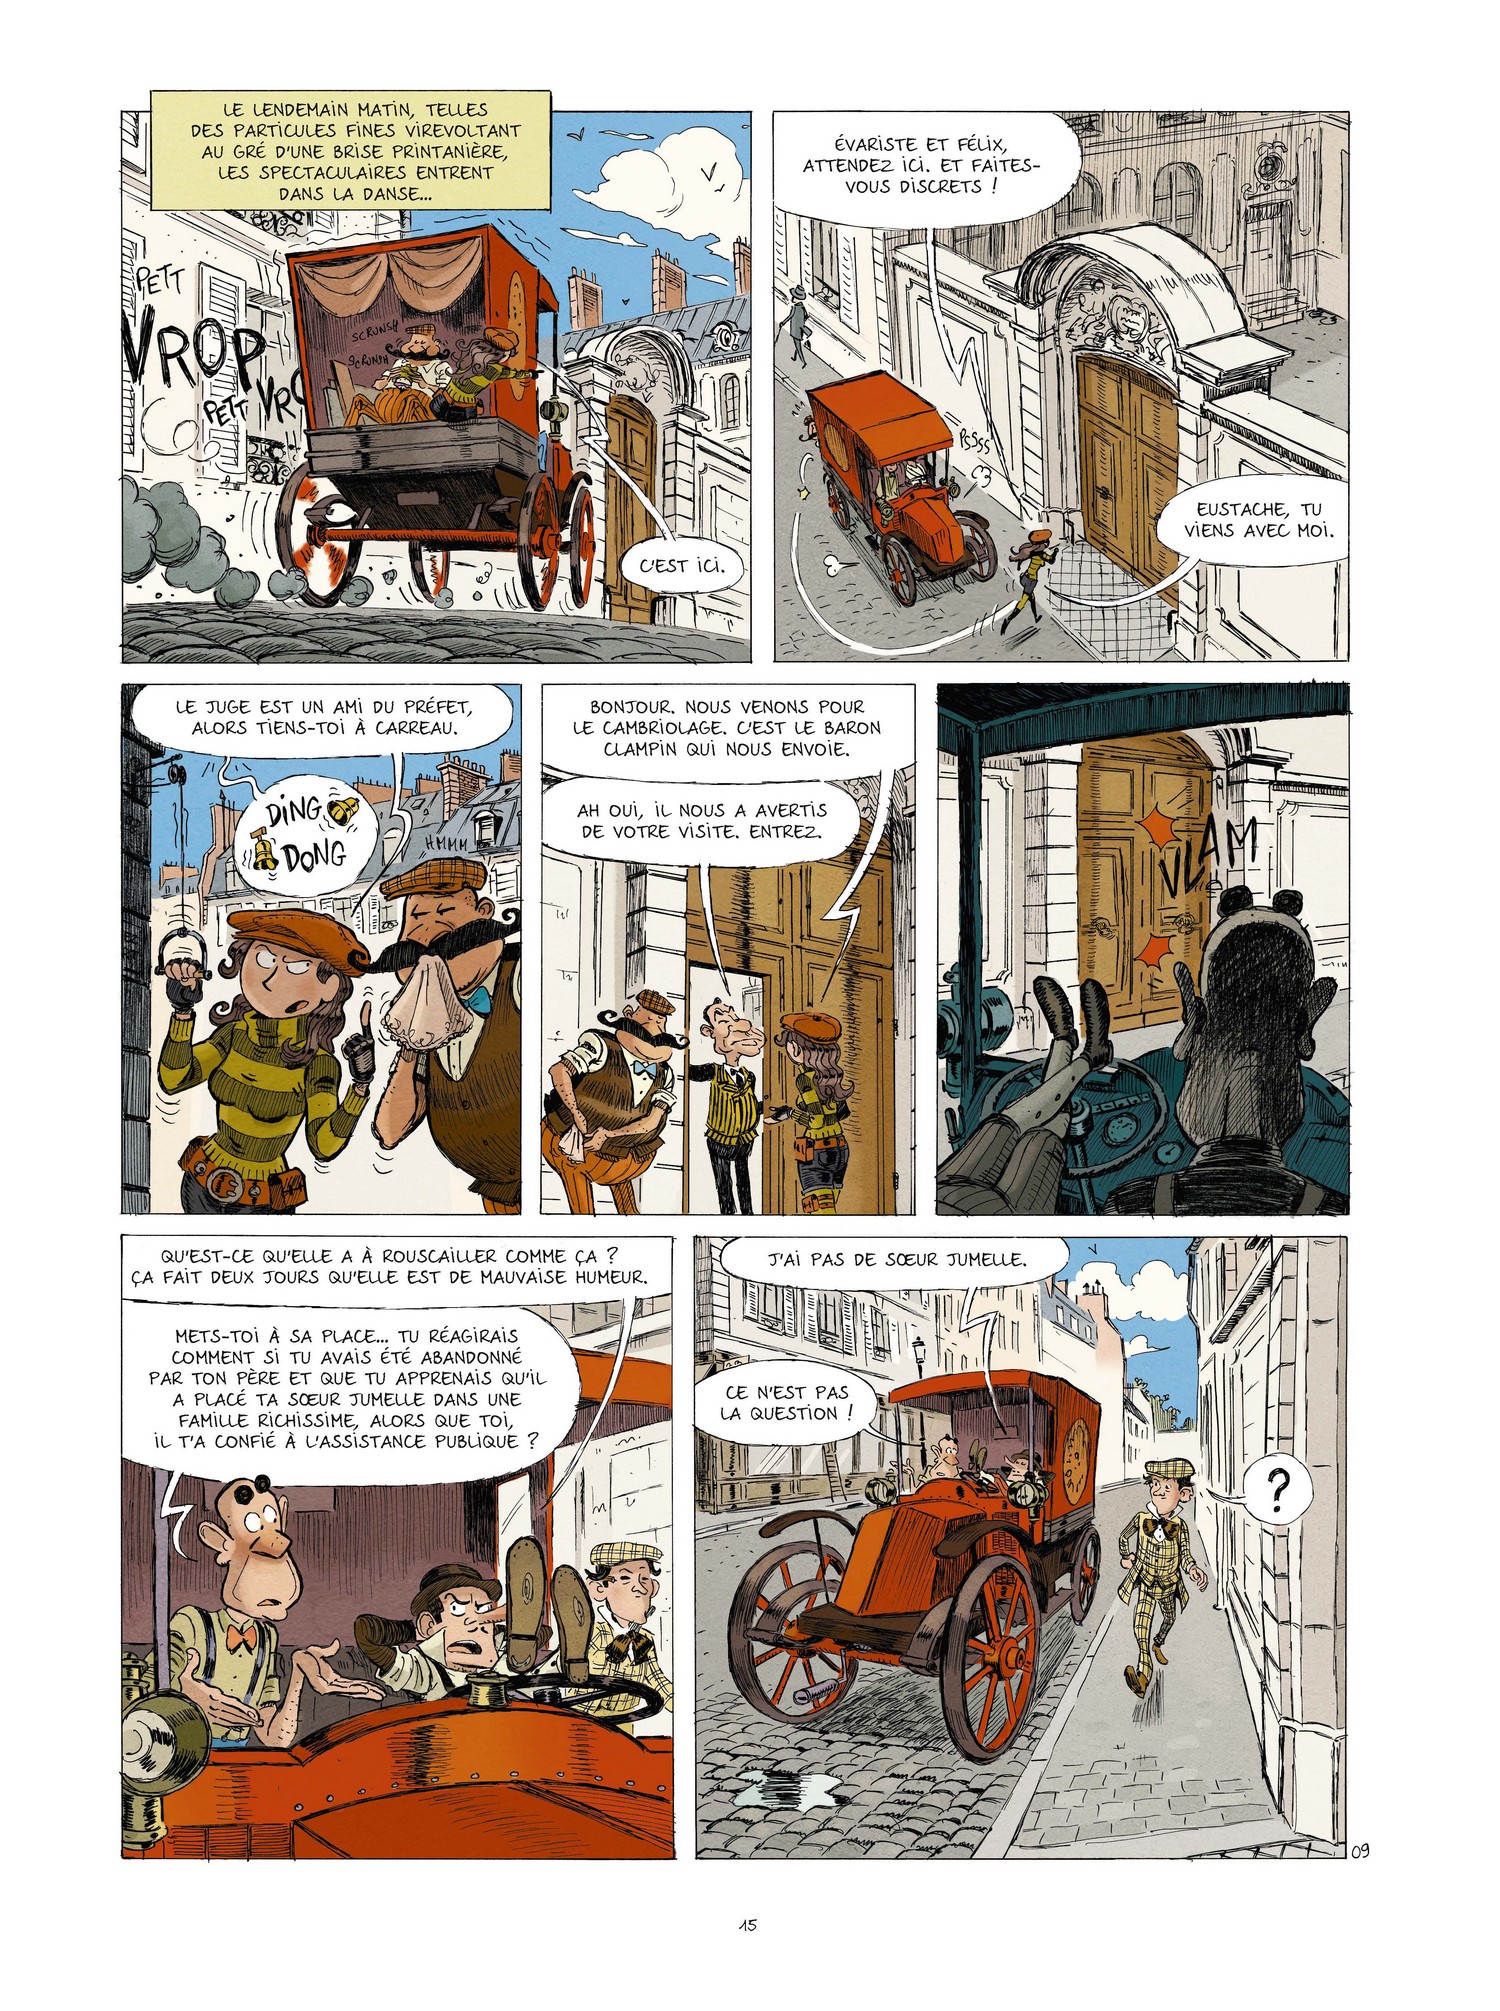 spectaculaires_5_pages_inte_page_3